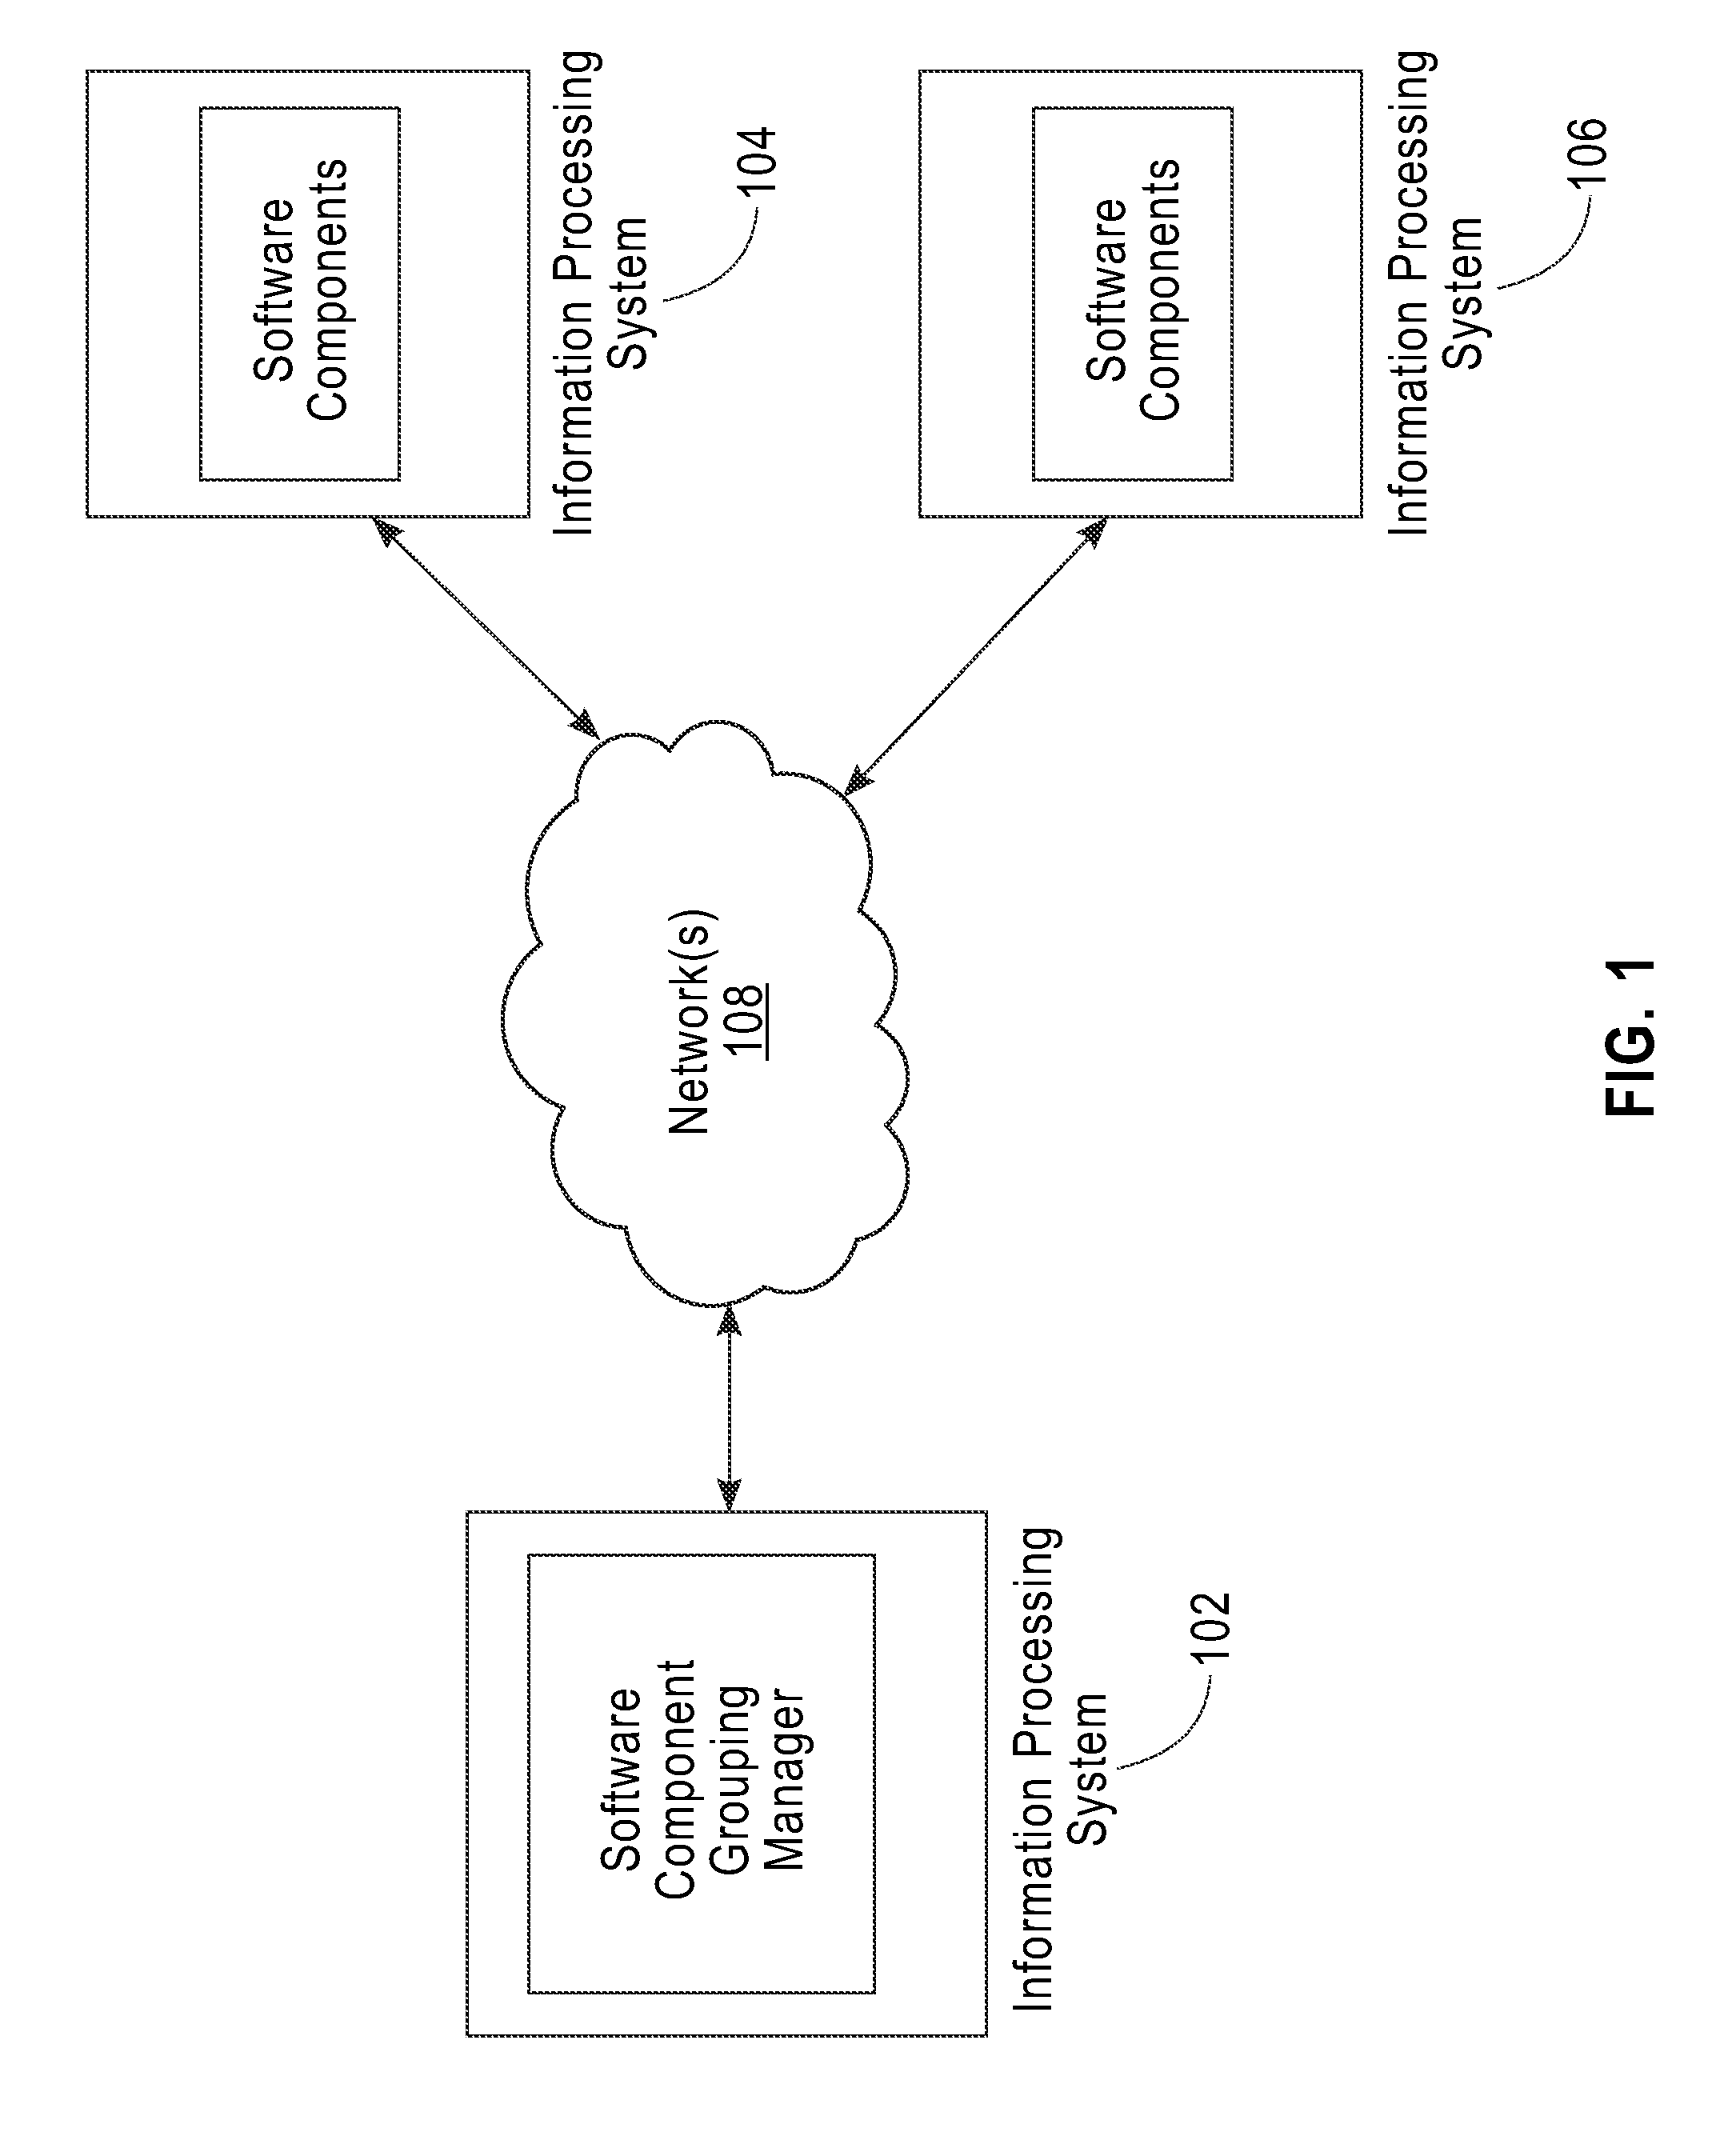 System for selecting software components based on a degree of coherence